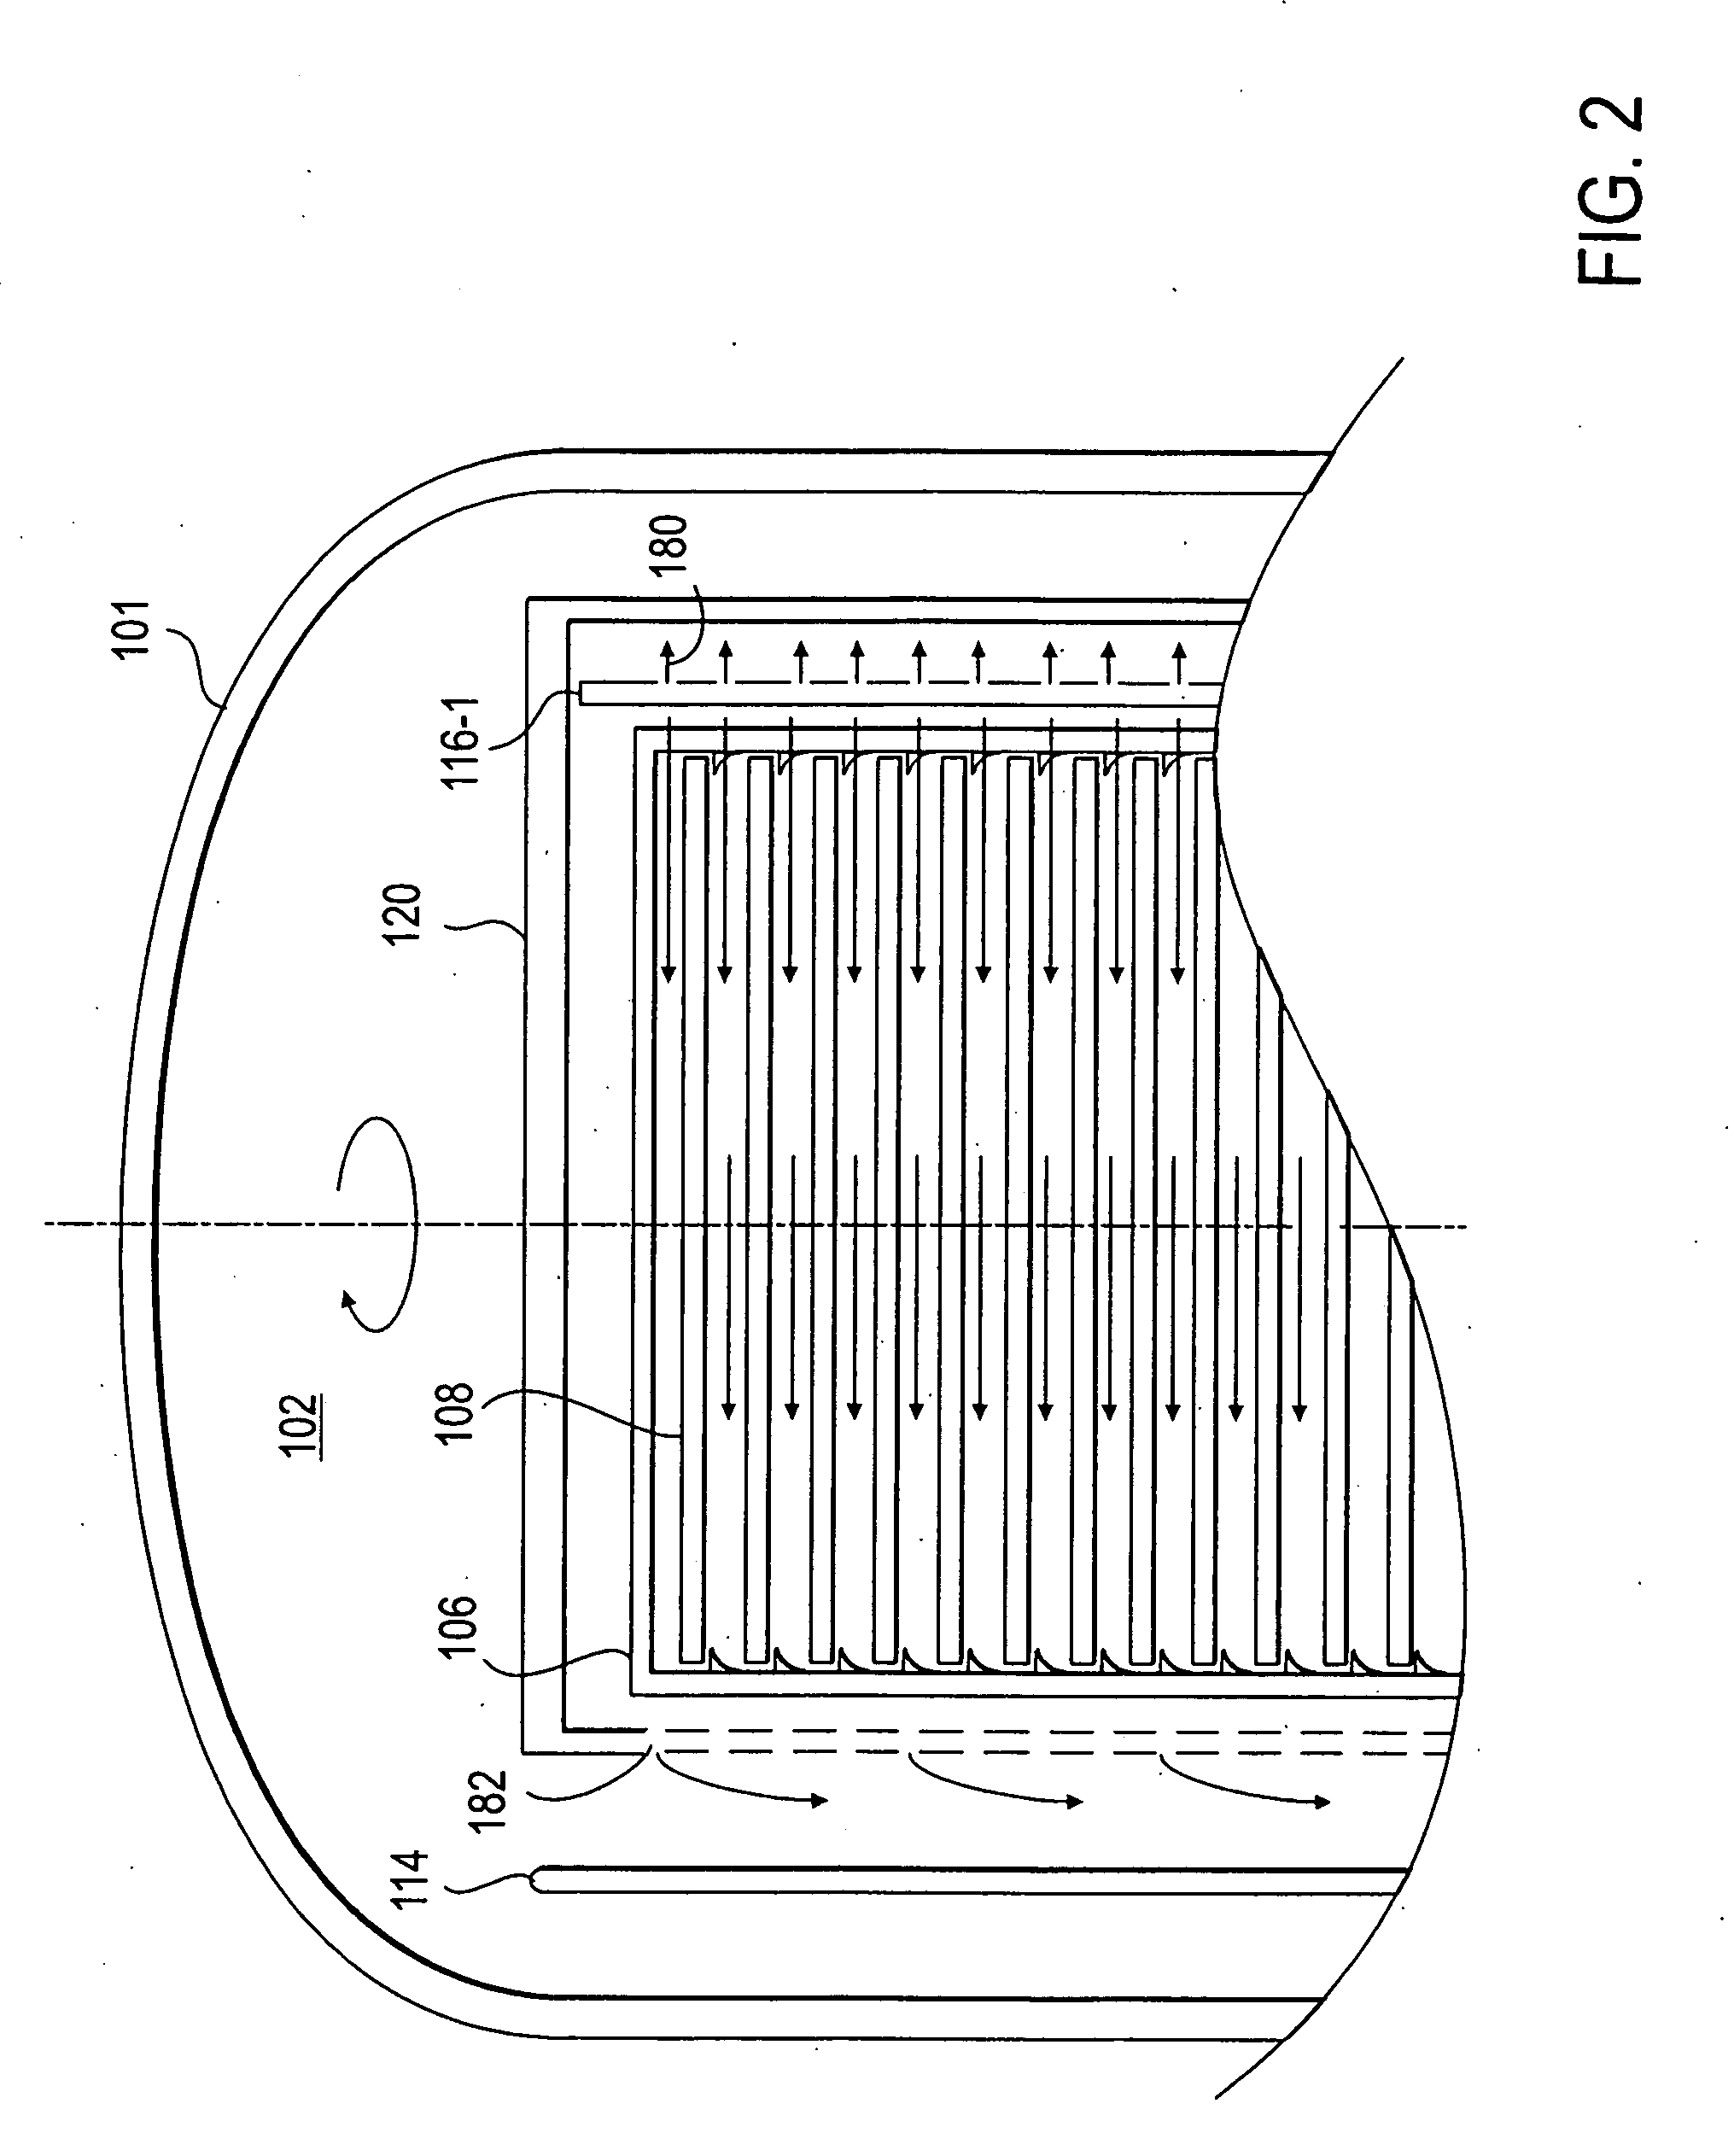 Method for depositing silicon-containing films